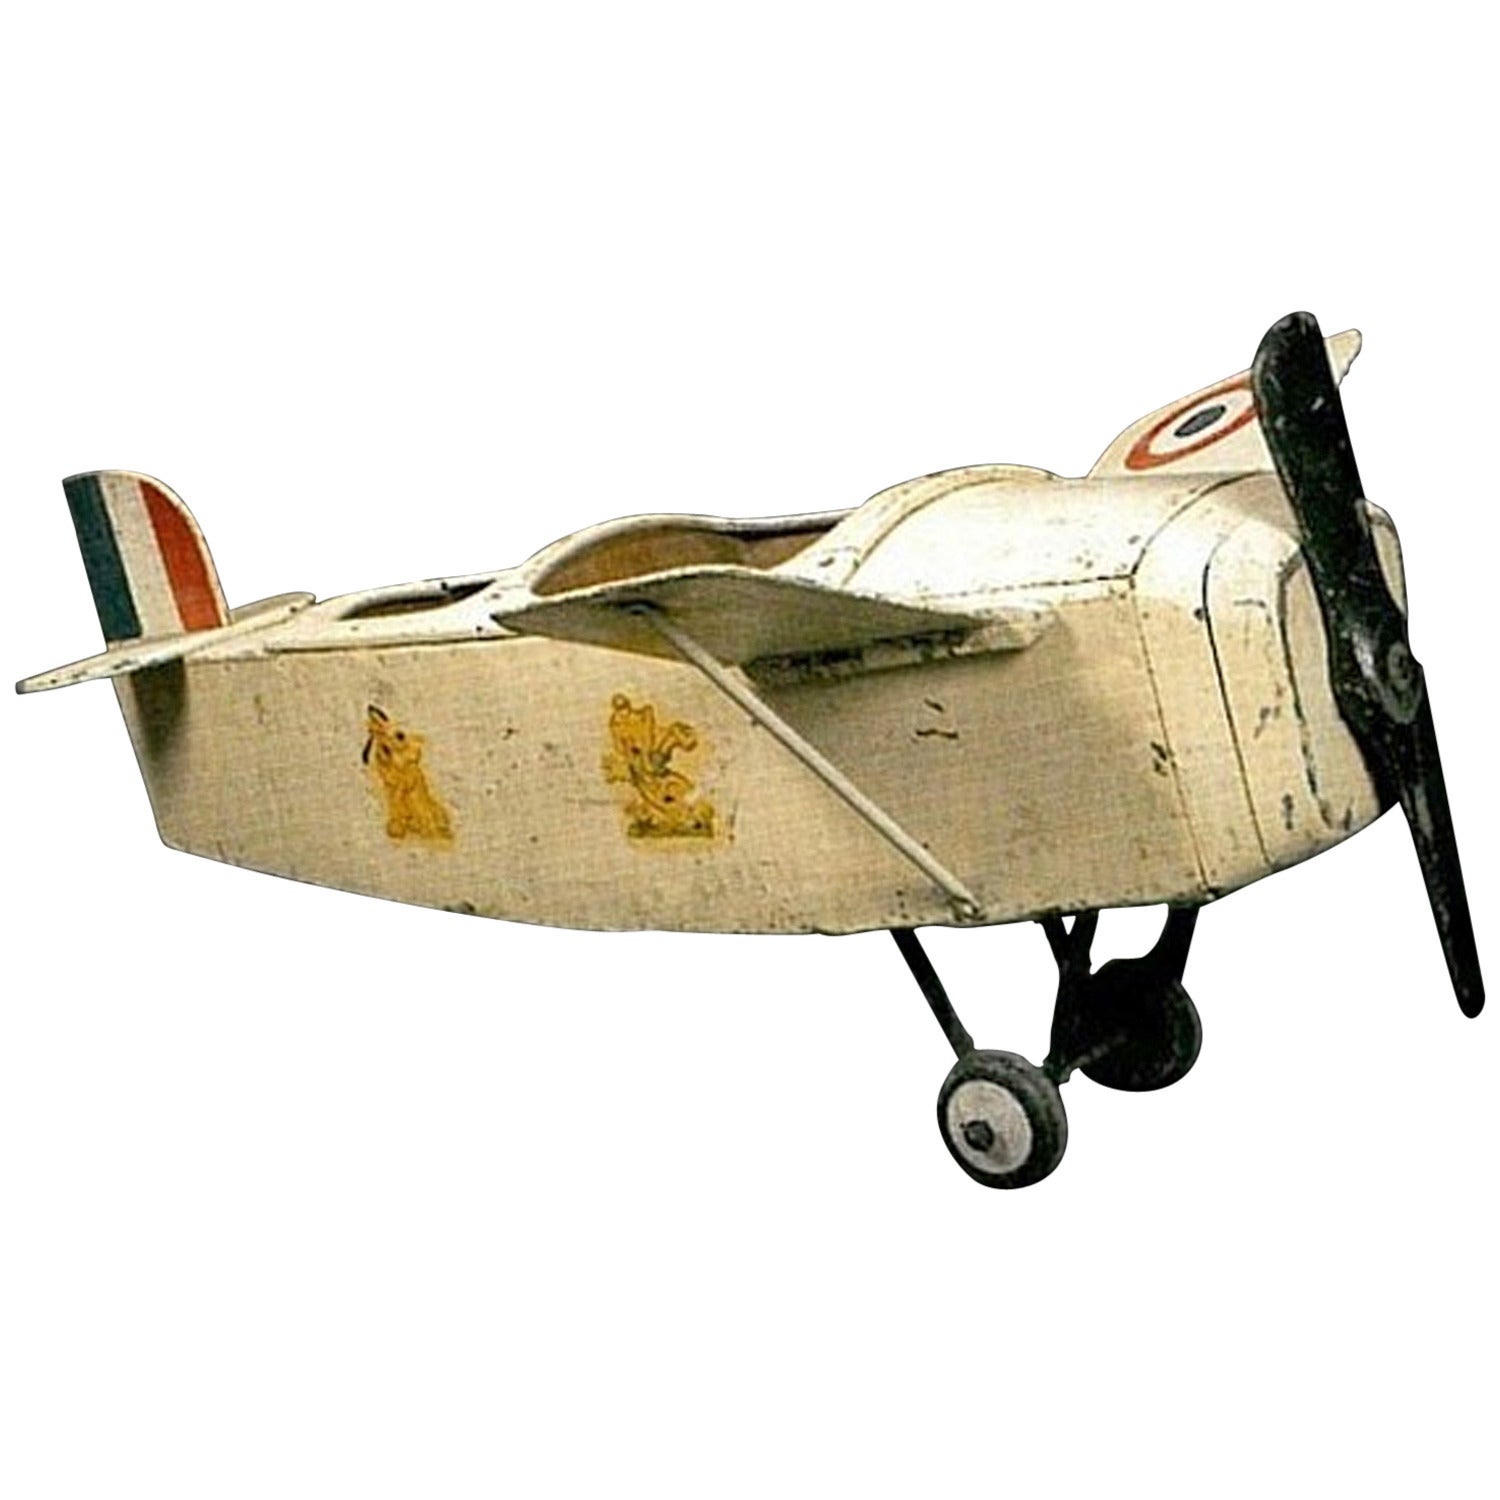 Two-Seat Aircraft Collector's Item Forain Art Exceptional Piece